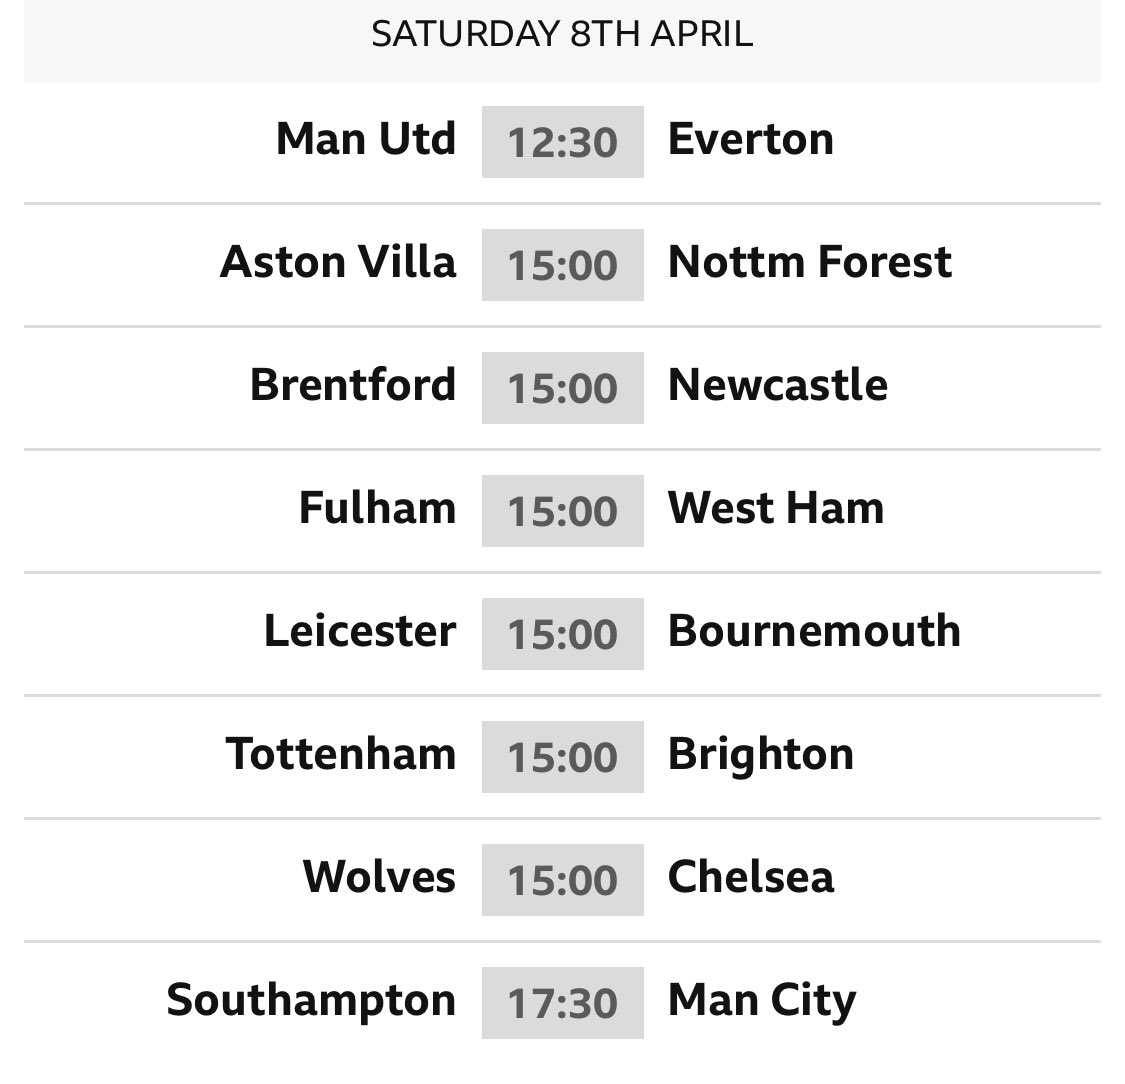 This weekend.

Leicester vs Bournemouth 
Aston Villa vs Nottm Forest
Wolves vs Chelsea 
Southampton vs Man City

As long we don’t take a huge hit on the GD and results go our way, it might not be the worst of weekends. #SaintsFC https://t.co/V4CSiCeFzV